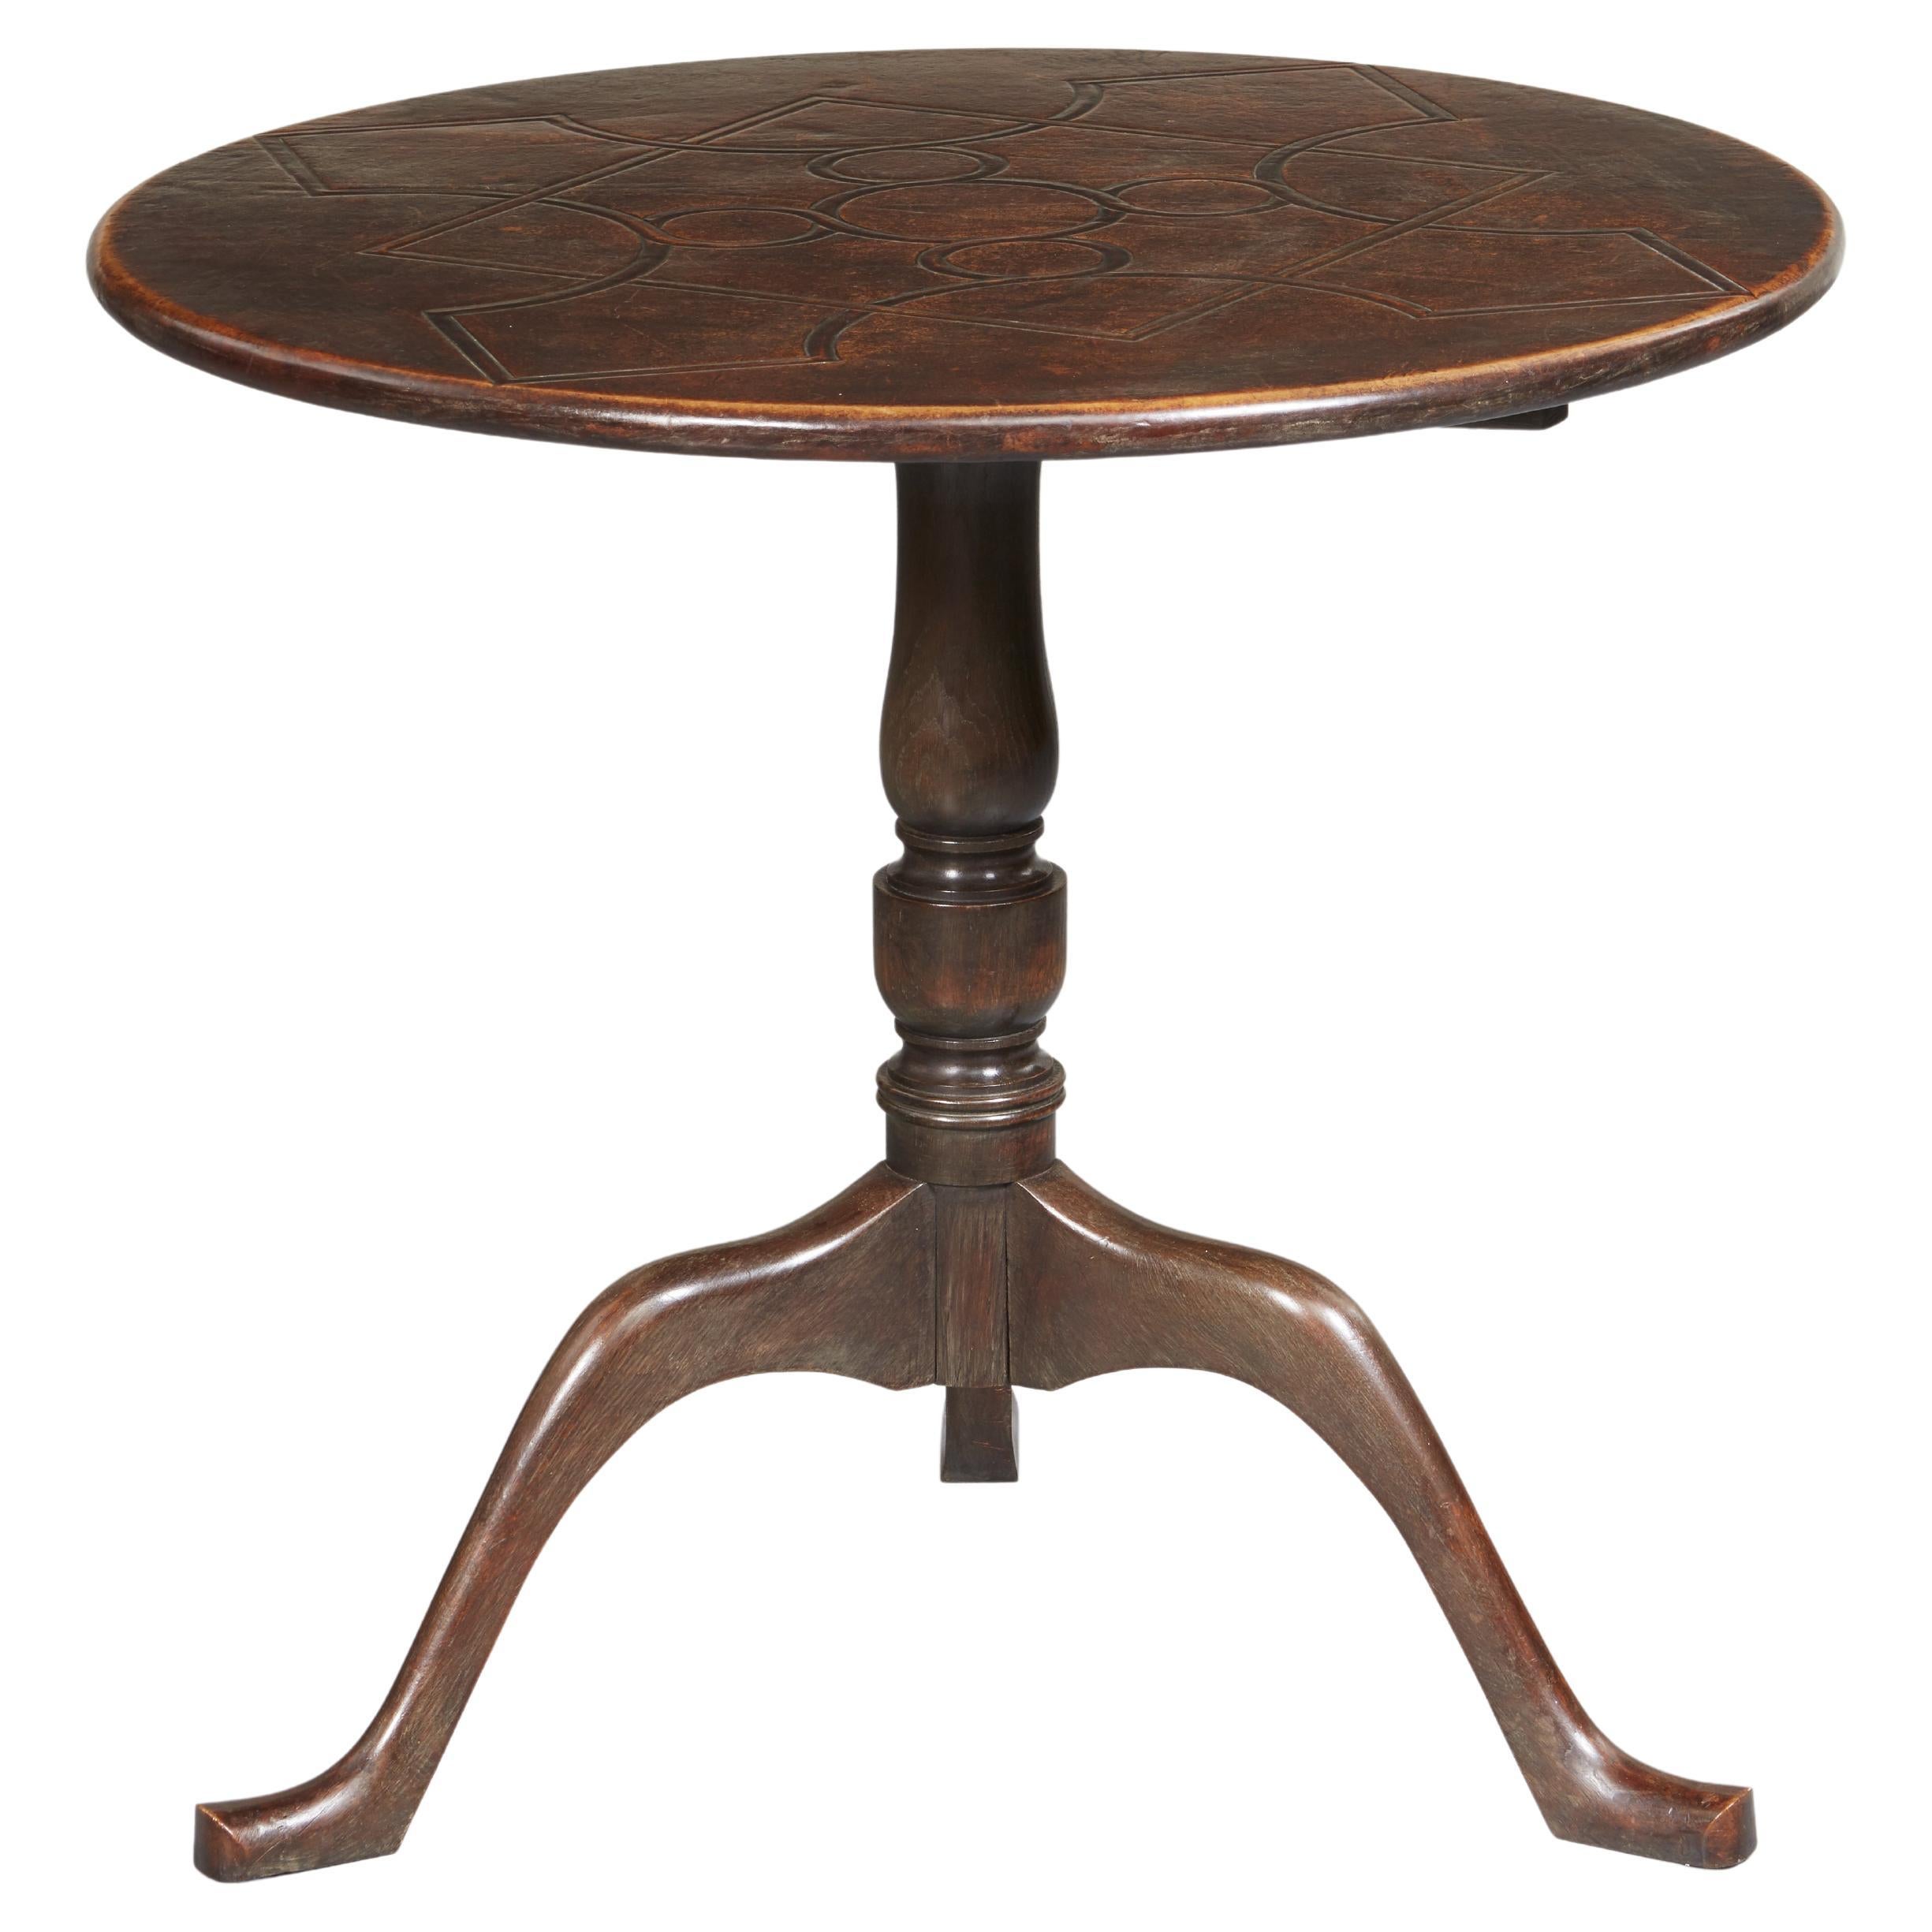 Very Unusual English Leather Clad Round Tripod Table